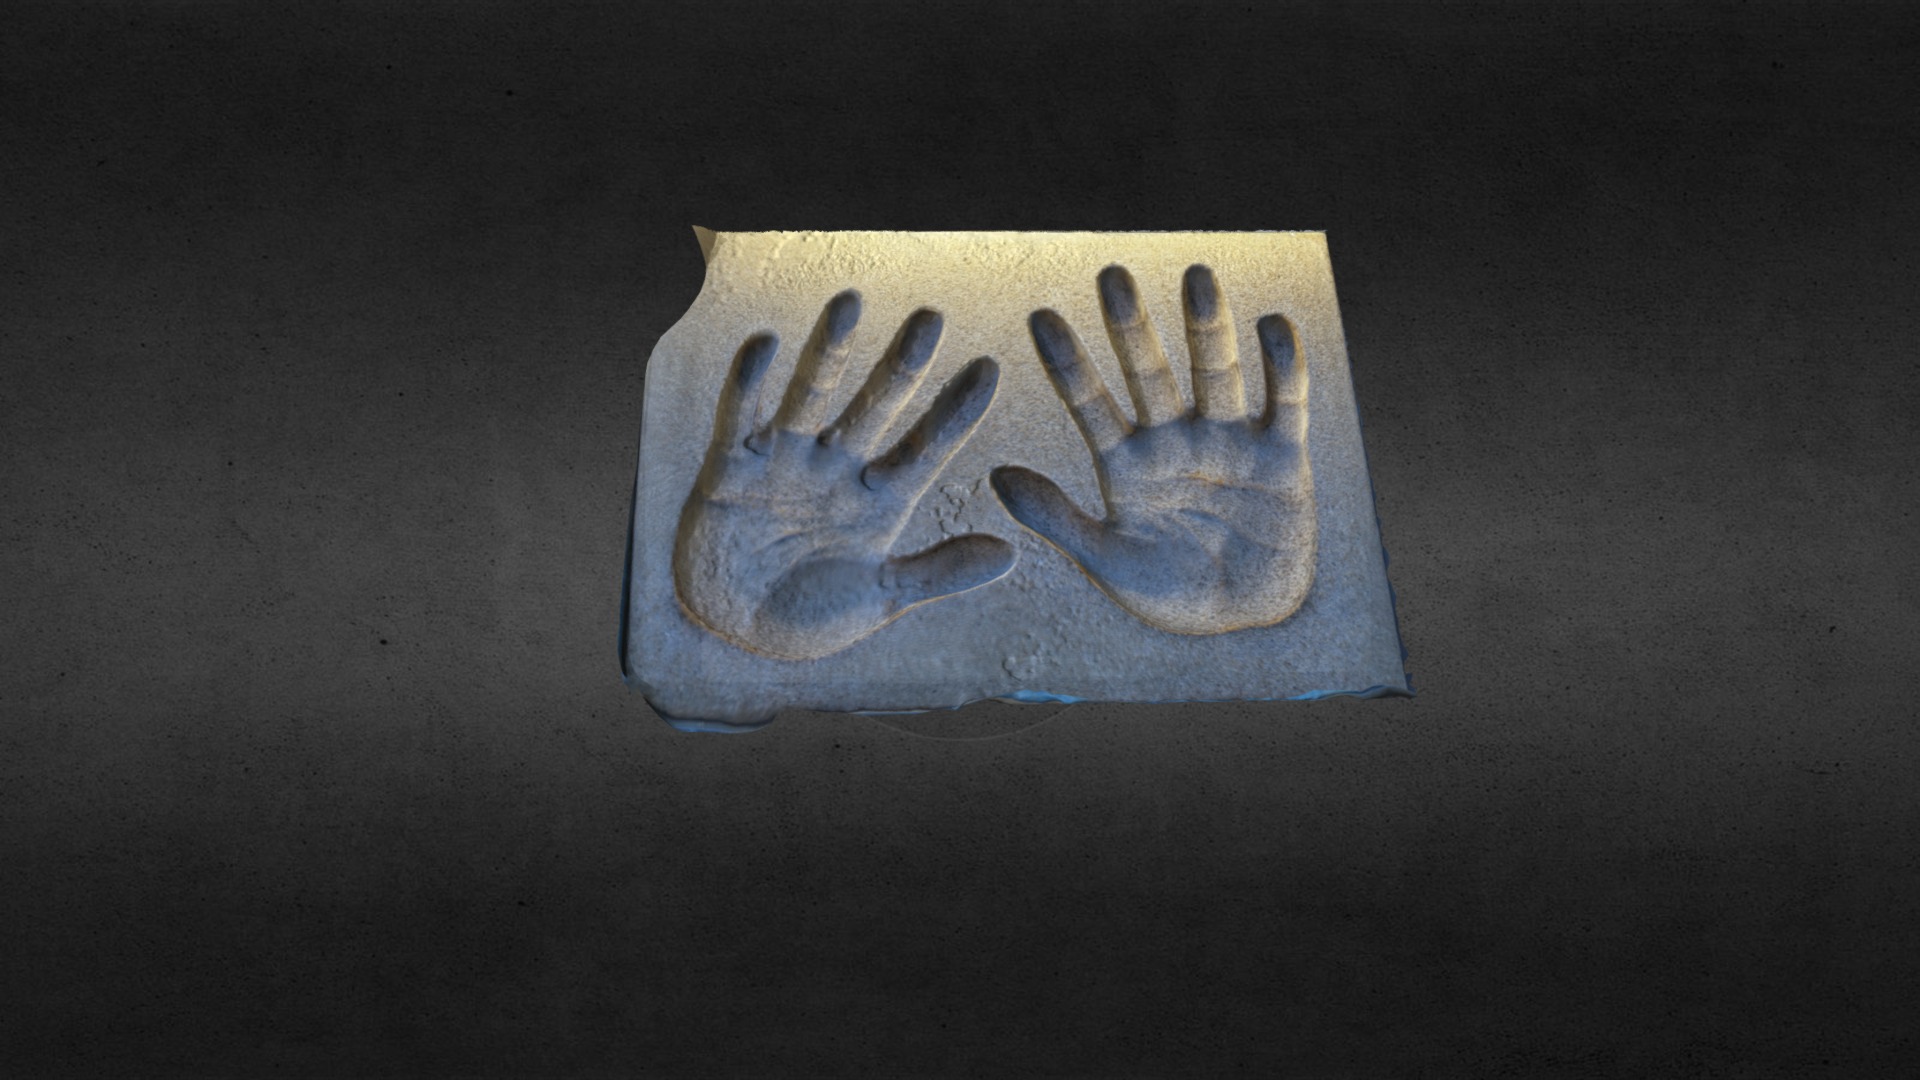 3D model Jet Li (李陽中) – hand print - This is a 3D model of the Jet Li (李陽中) - hand print. The 3D model is about a square object with a design on it.